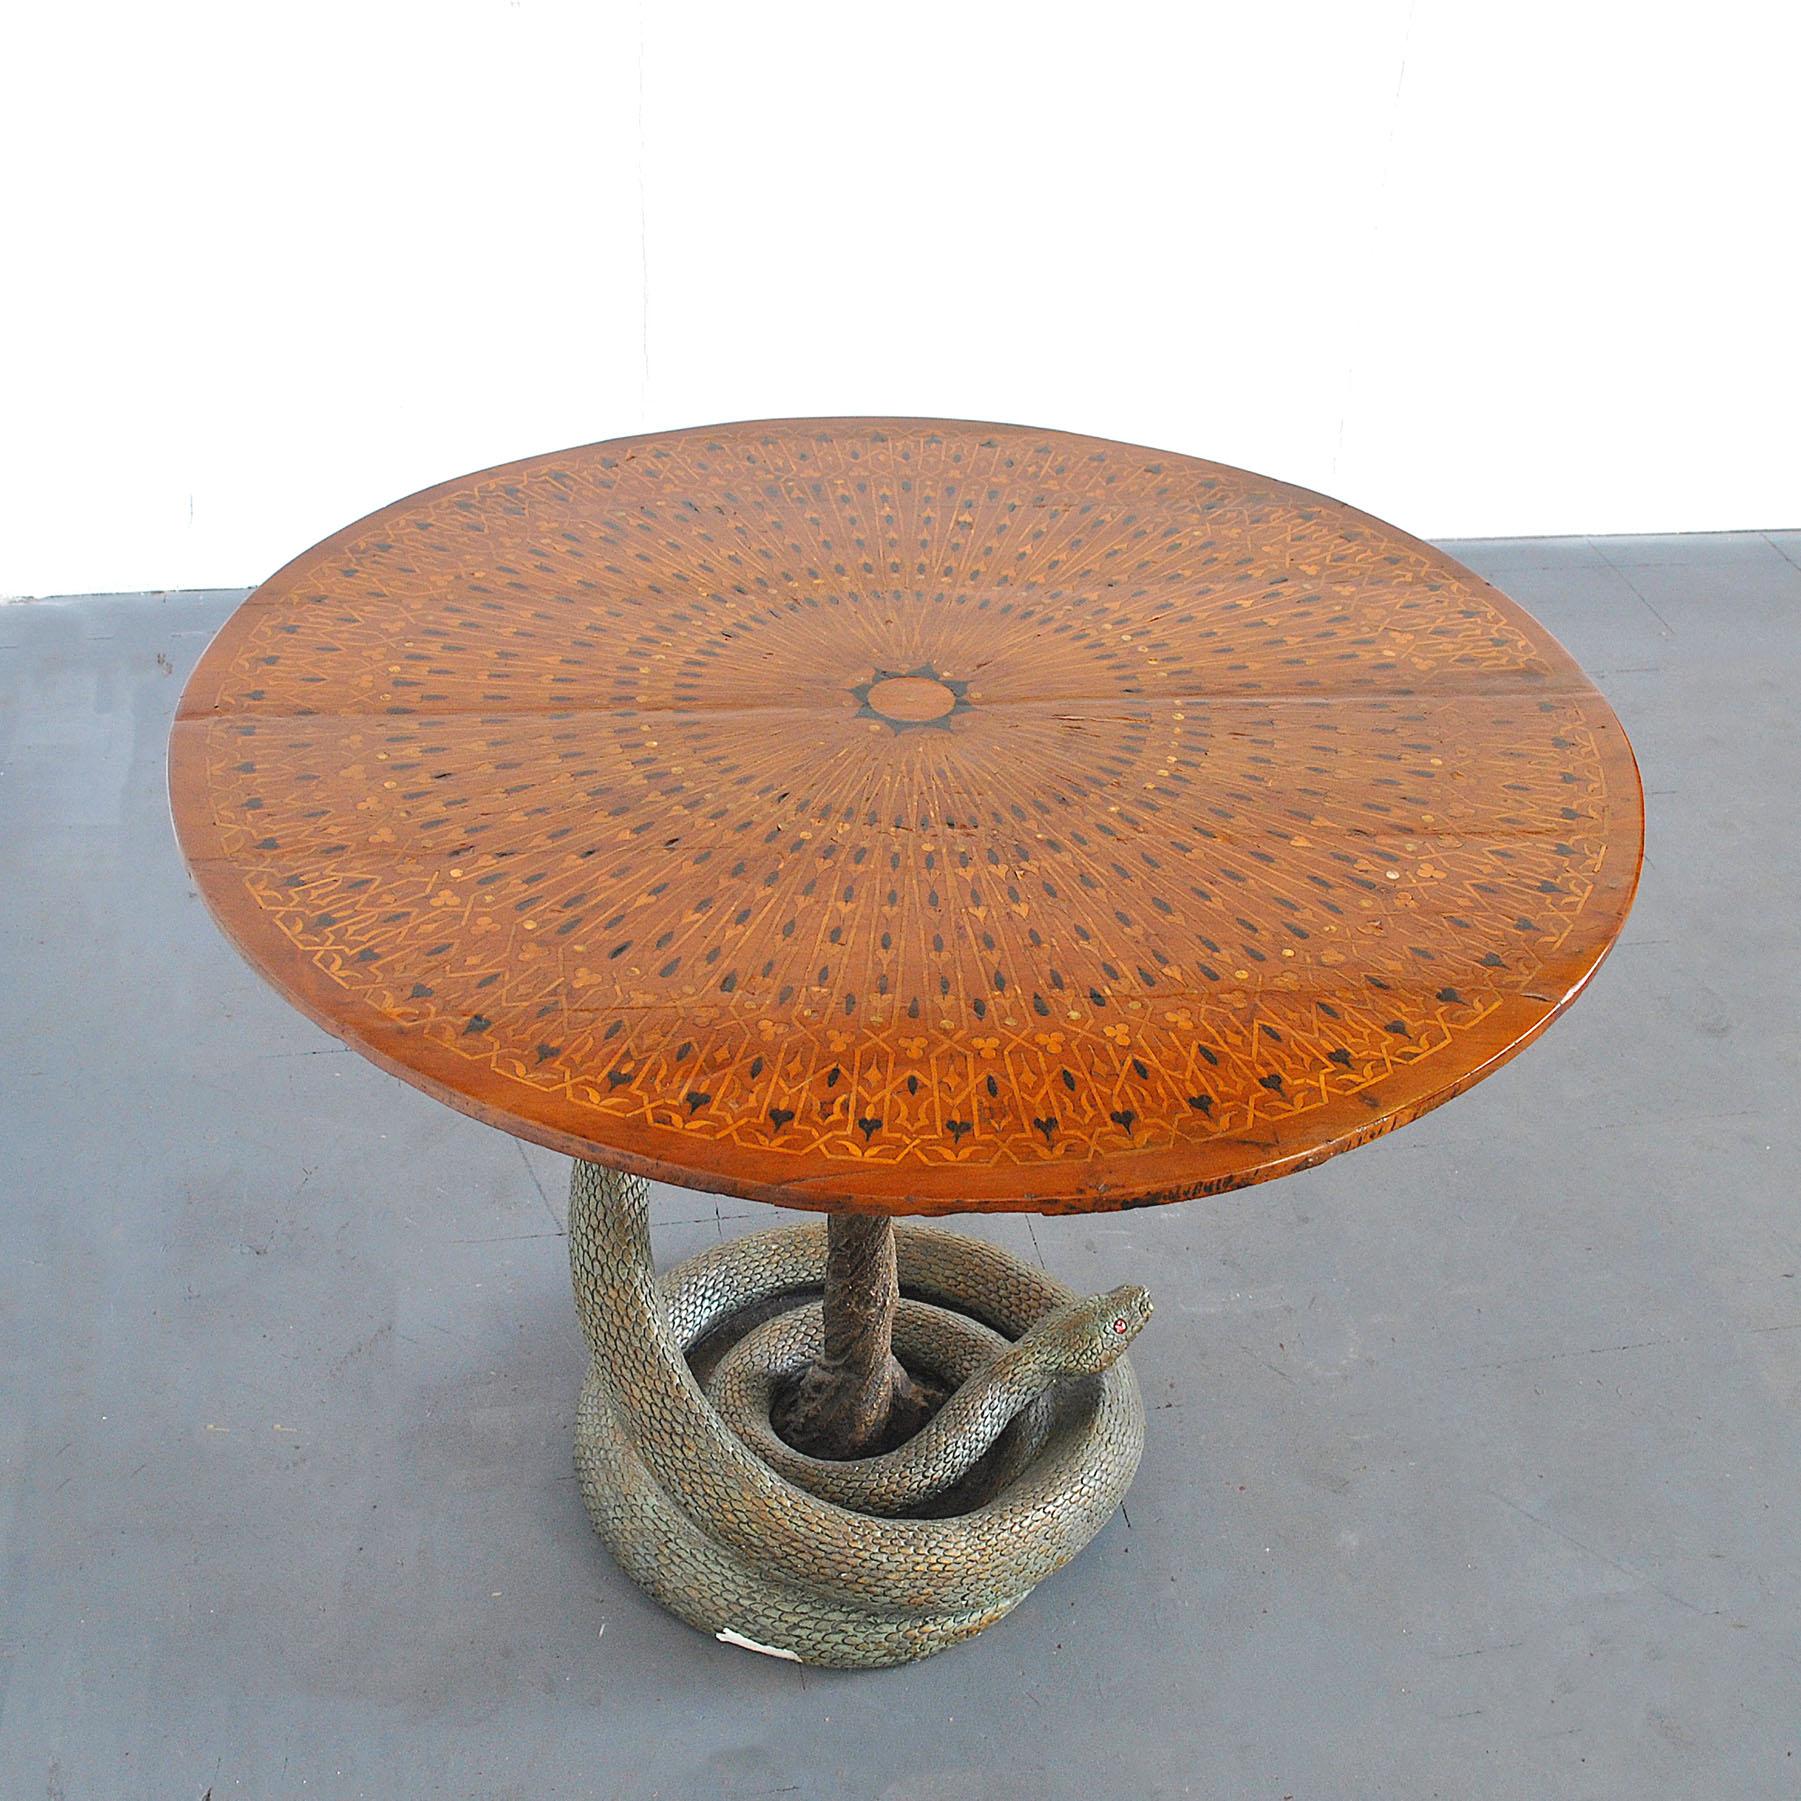 Eclectic Game Table with Python Sculpture from the Fifties For Sale 2